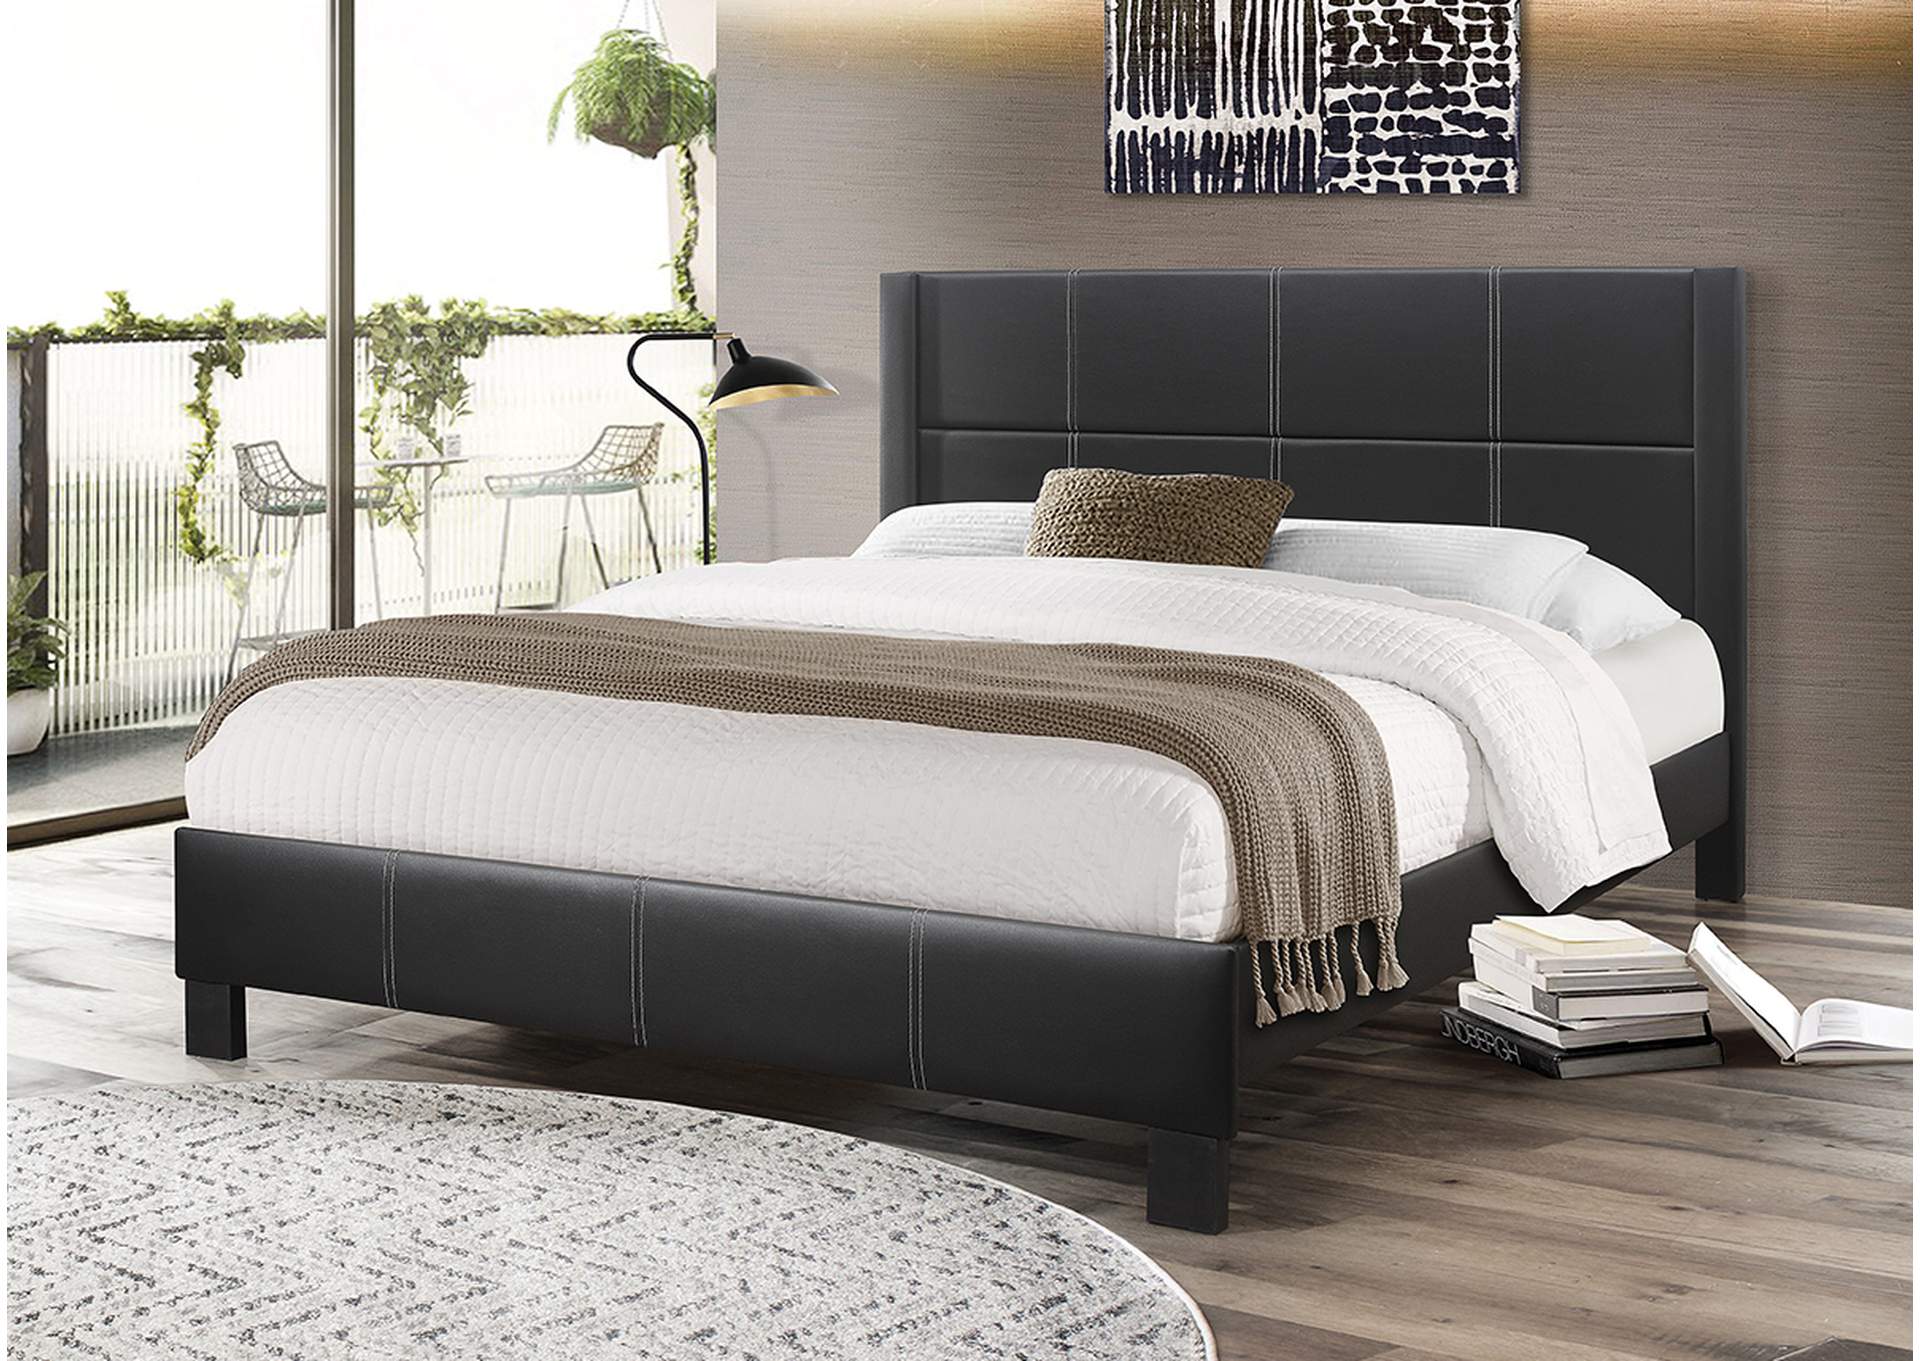 B602 Twin Bed,Nationwide